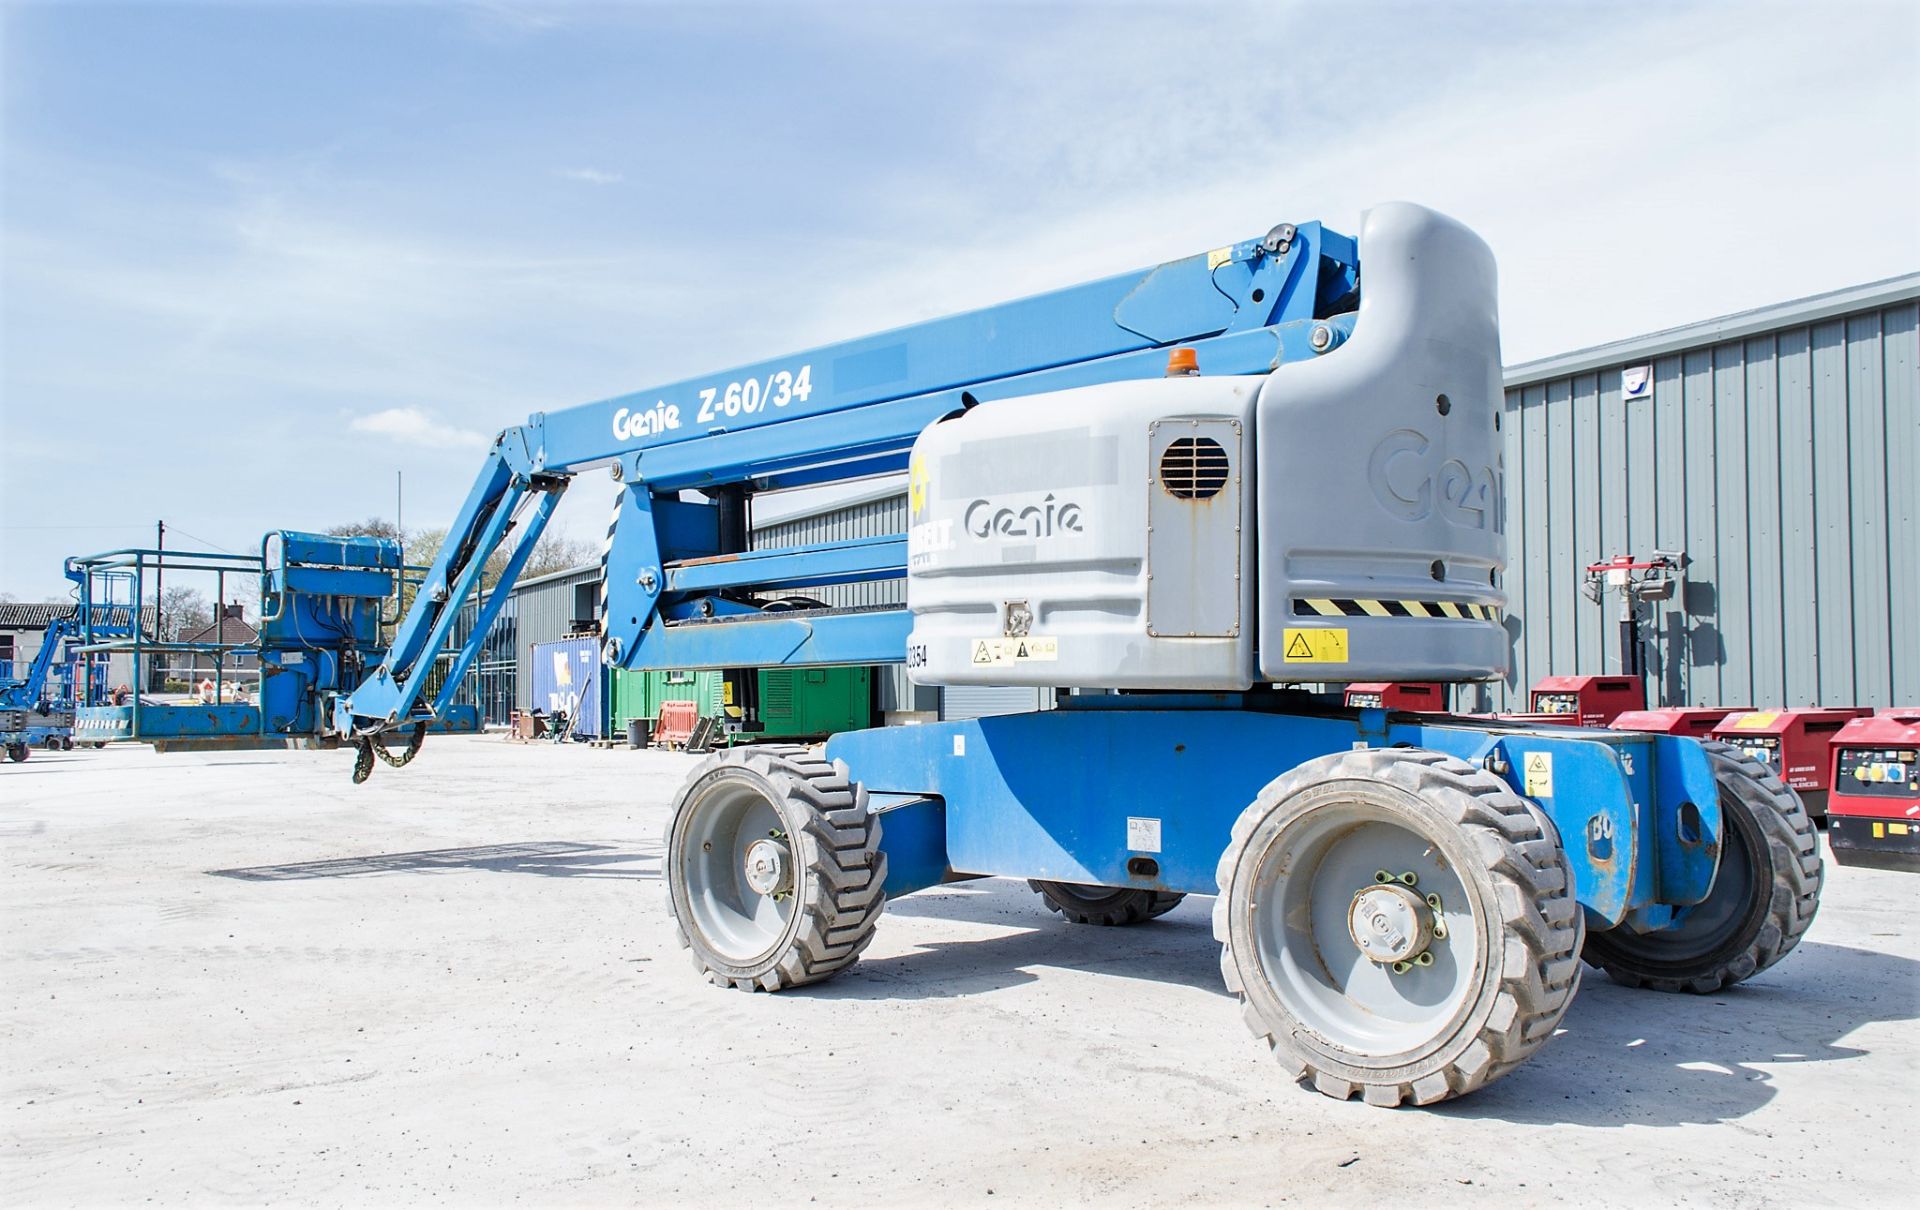 Genie Z60/34 diesel driven articulated boom access platform Year: 2014 S/N: 13399 Recorded Hours: - Image 3 of 16